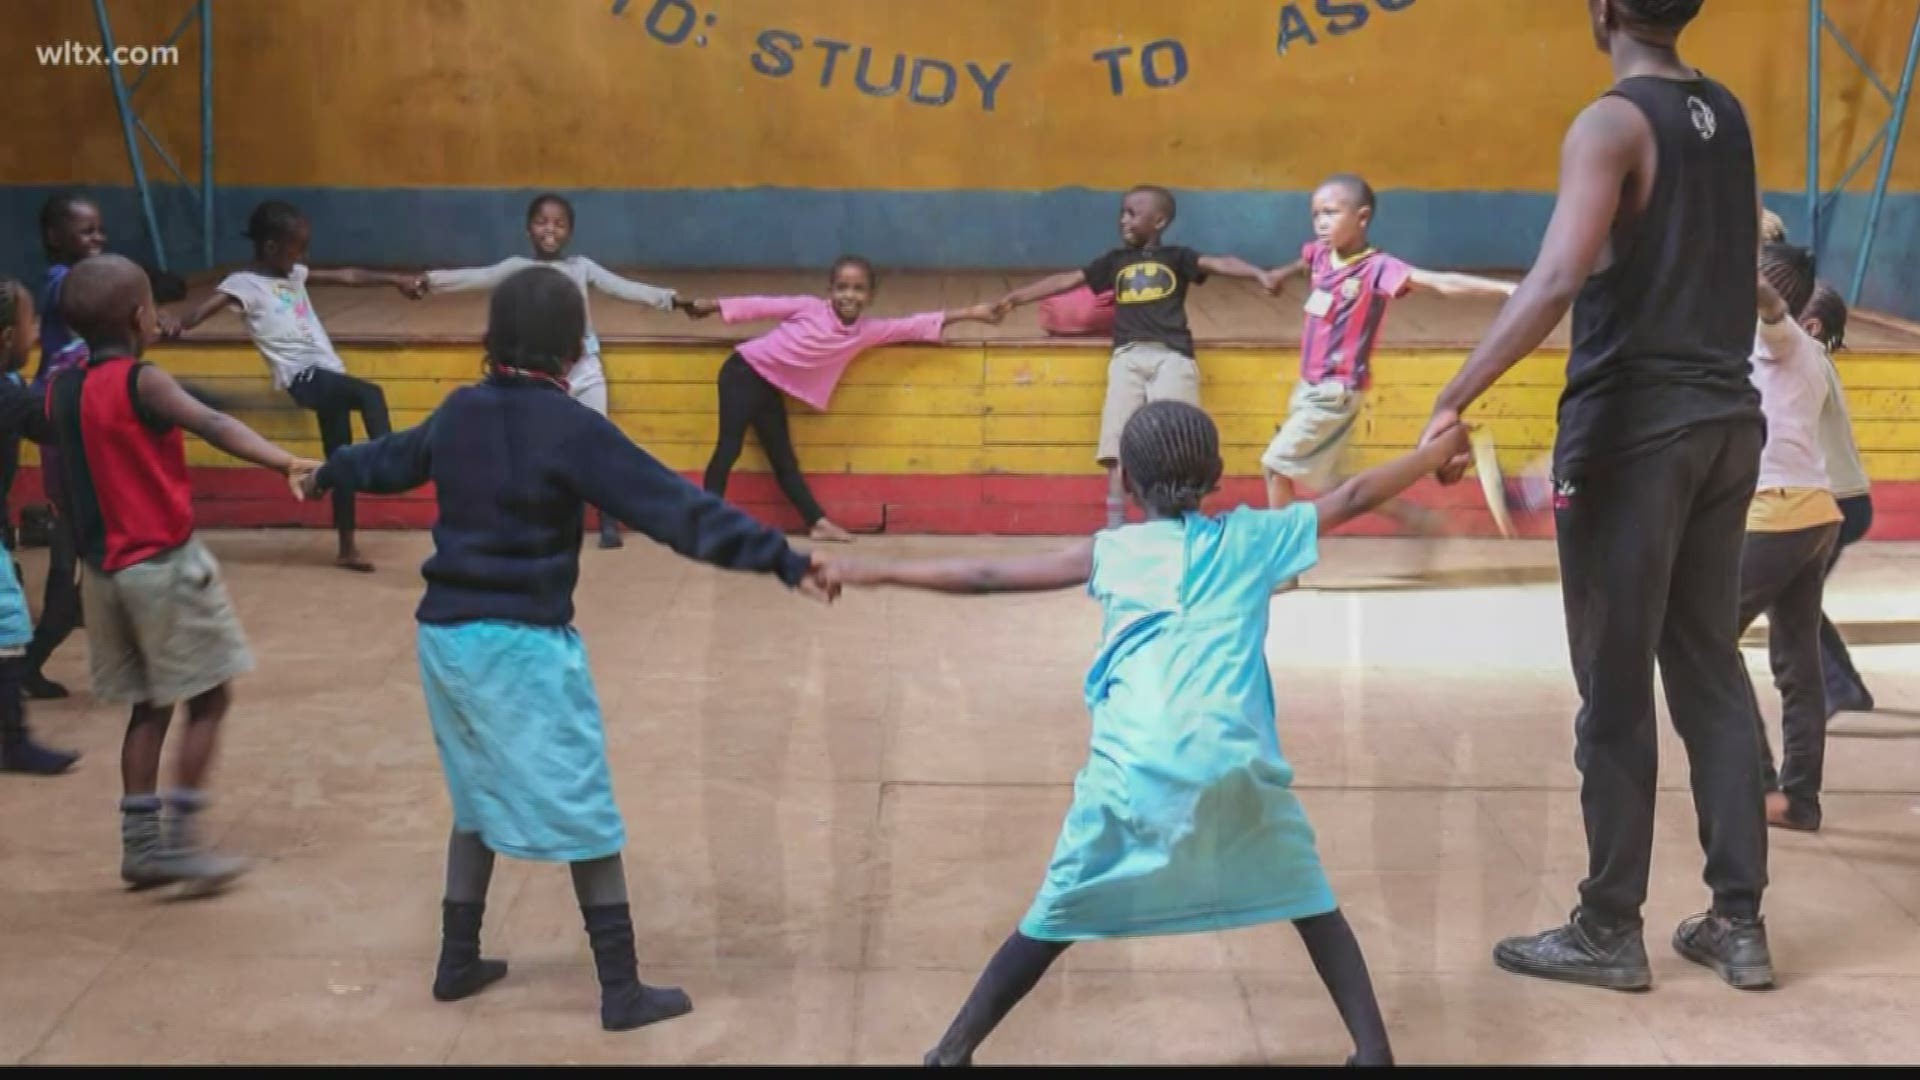 For the past seven years, Artists For Africa has been sponsoring gifted dancers from Kenya with the hopes of improving their dancing techniques and their lives